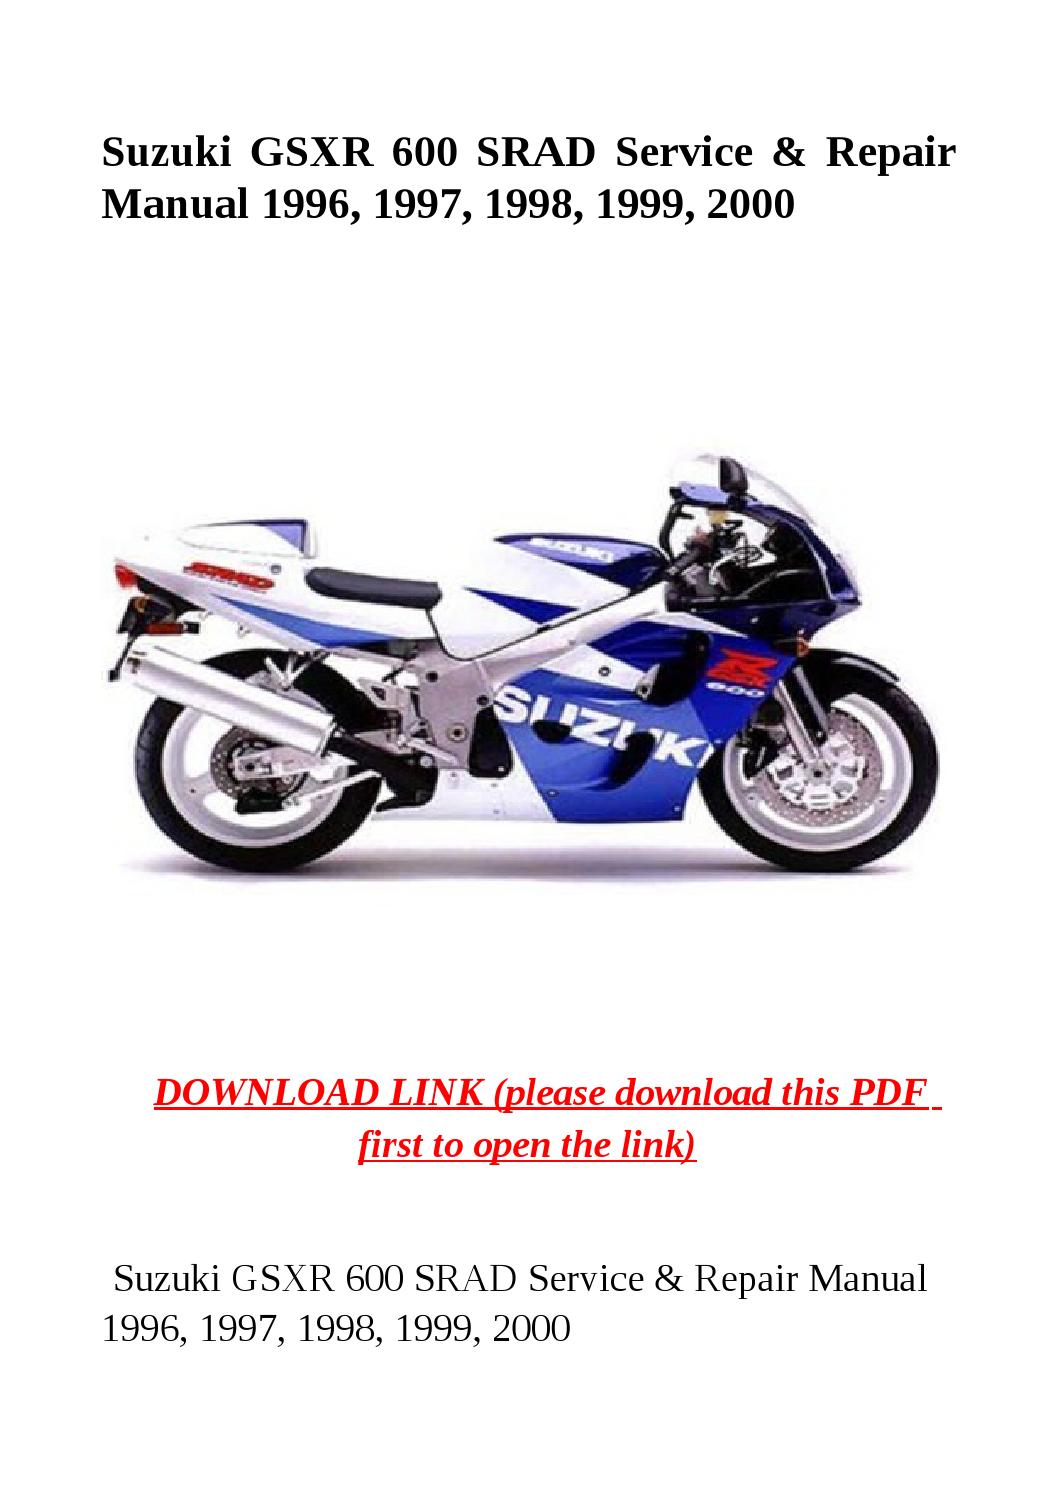 2009 gsxr 600 owners manual